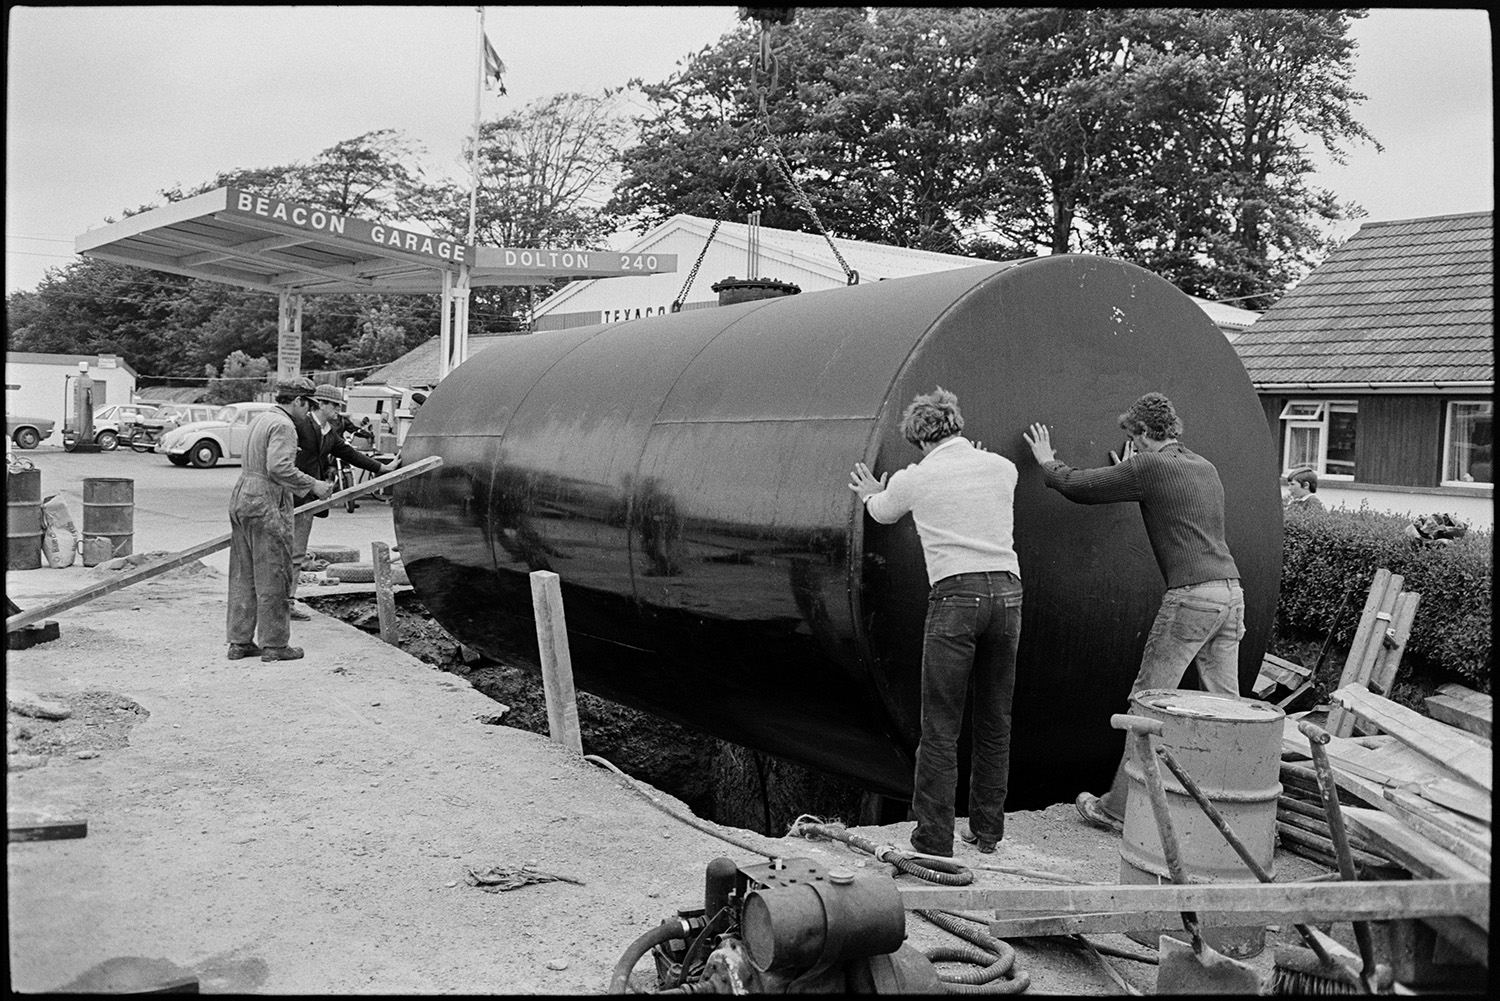 Men with crane installing huge underground petrol tank at garage.
[Four men helping to lower a large petrol tank being lowered by a crane into an excavated hole at Beacon Garage, Dolton Beacon. Cars on the forecourt of the Garage are visible in the background.]